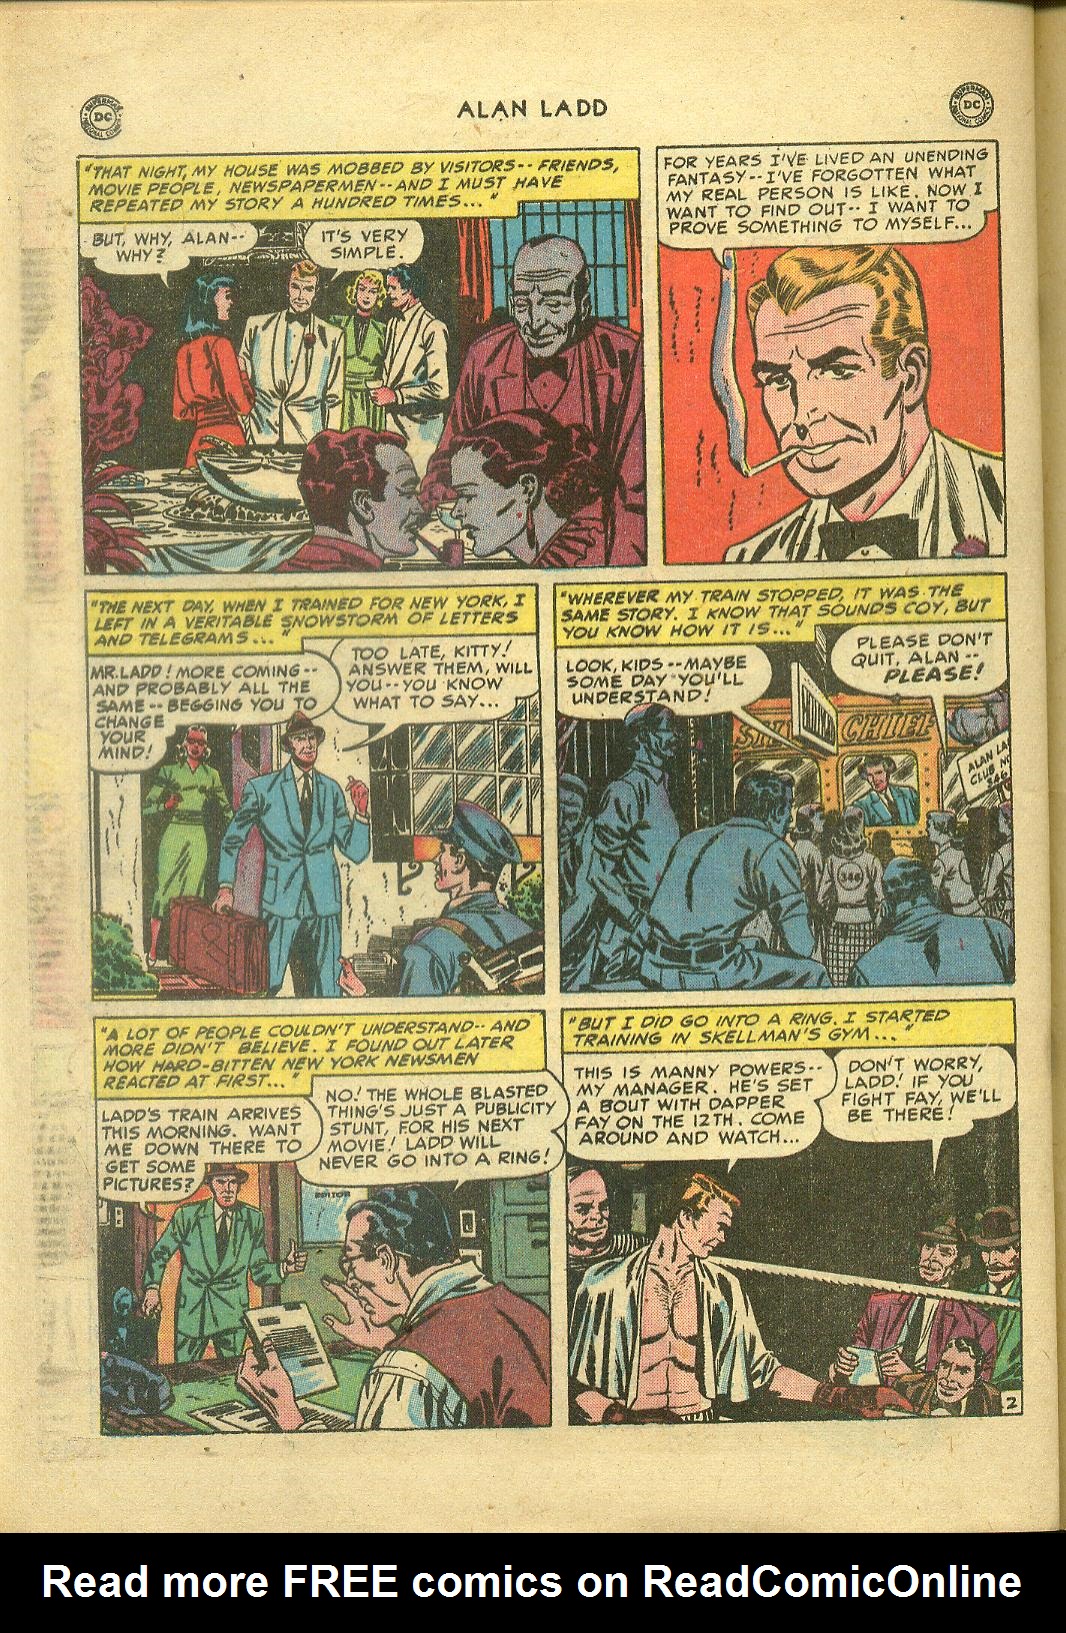 Read online Adventures of Alan Ladd comic -  Issue #2 - 40